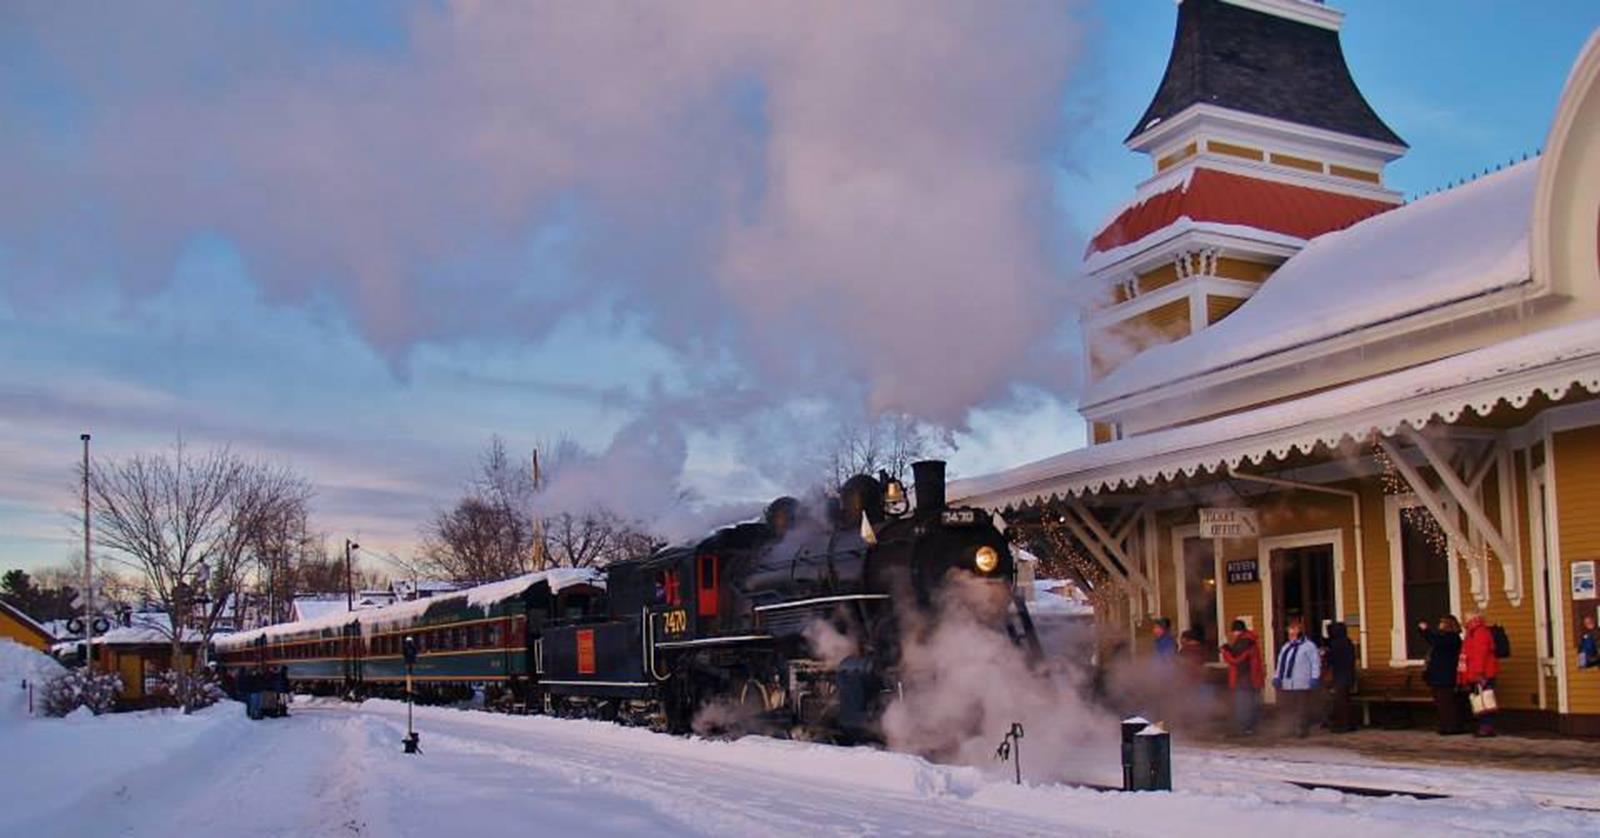 Pulling into the station. Credit: Conway Scenic Railroad